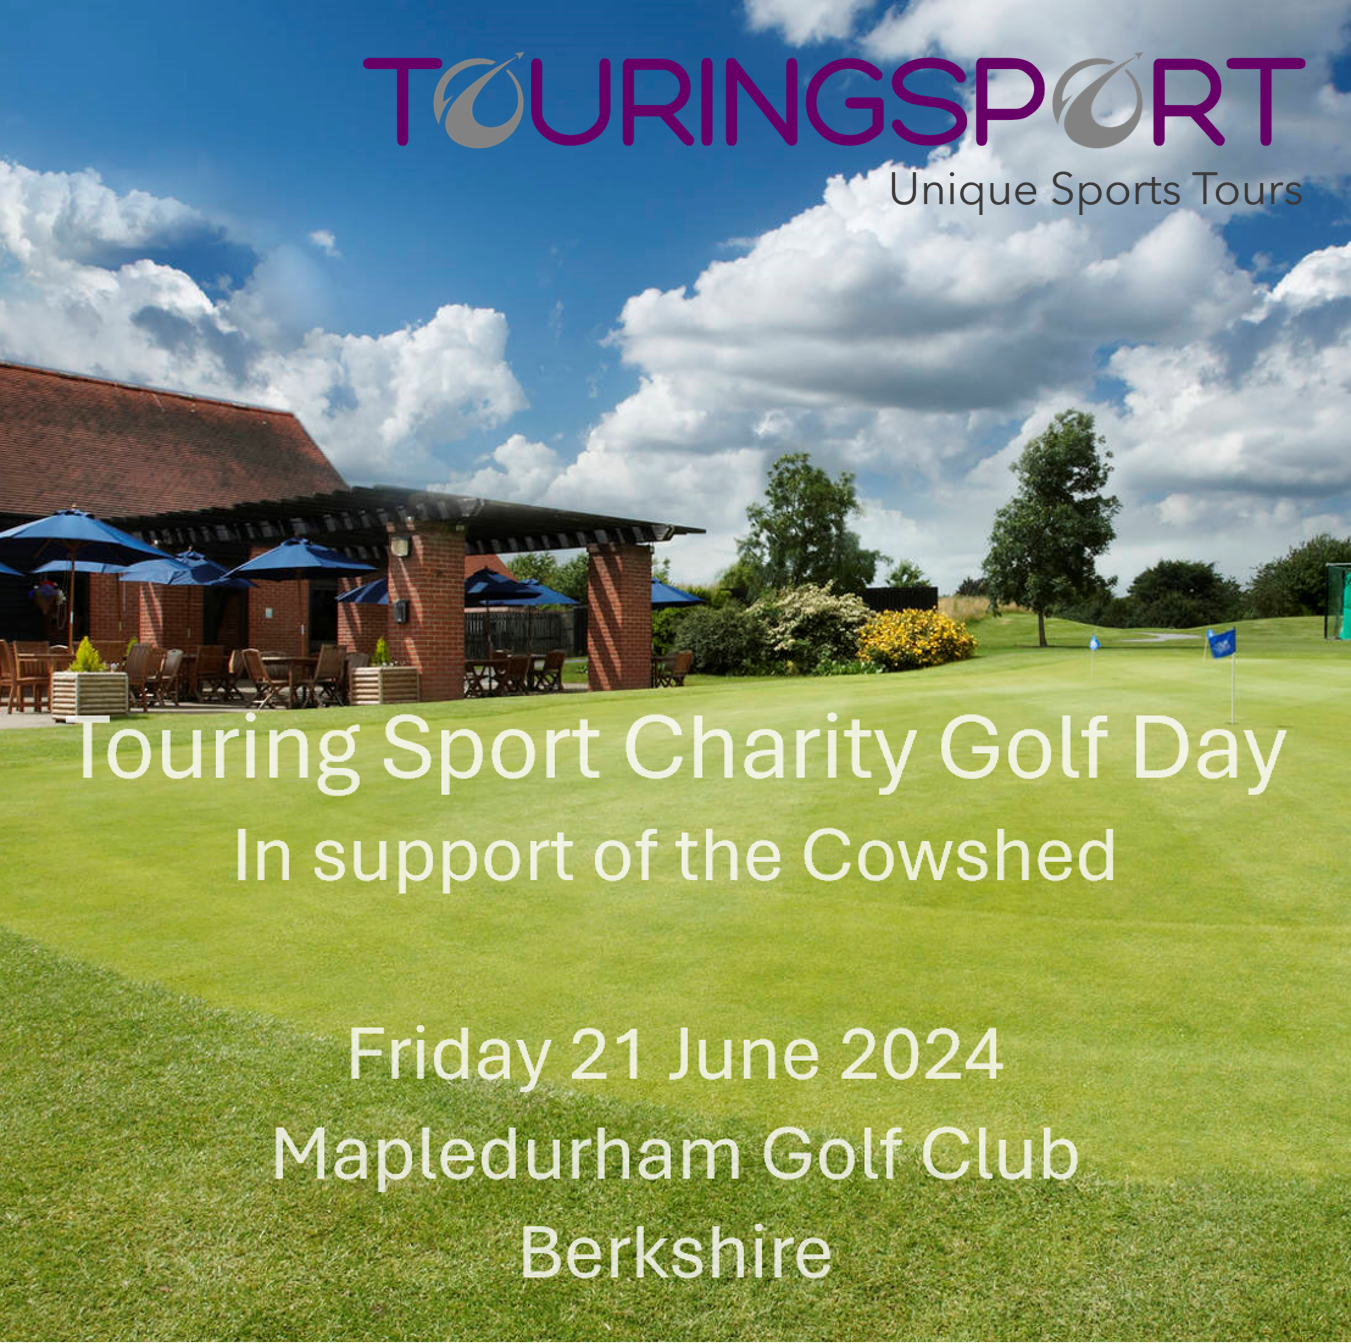 Touring Sport Charity Golf Day